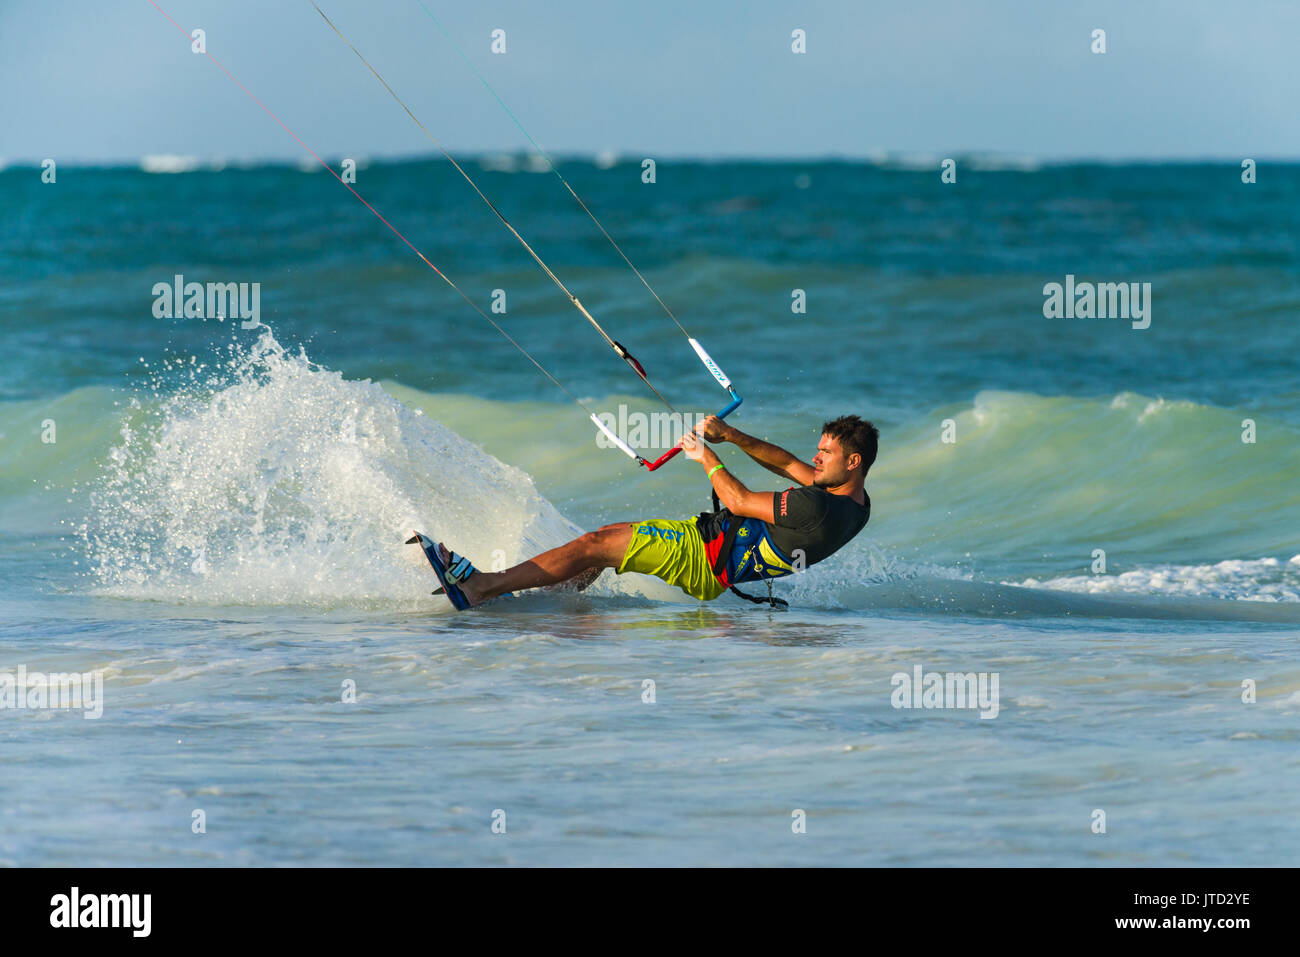 Kite surfer surfing close to shore on board in late afternoon light, Diani, Kenya Stock Photo